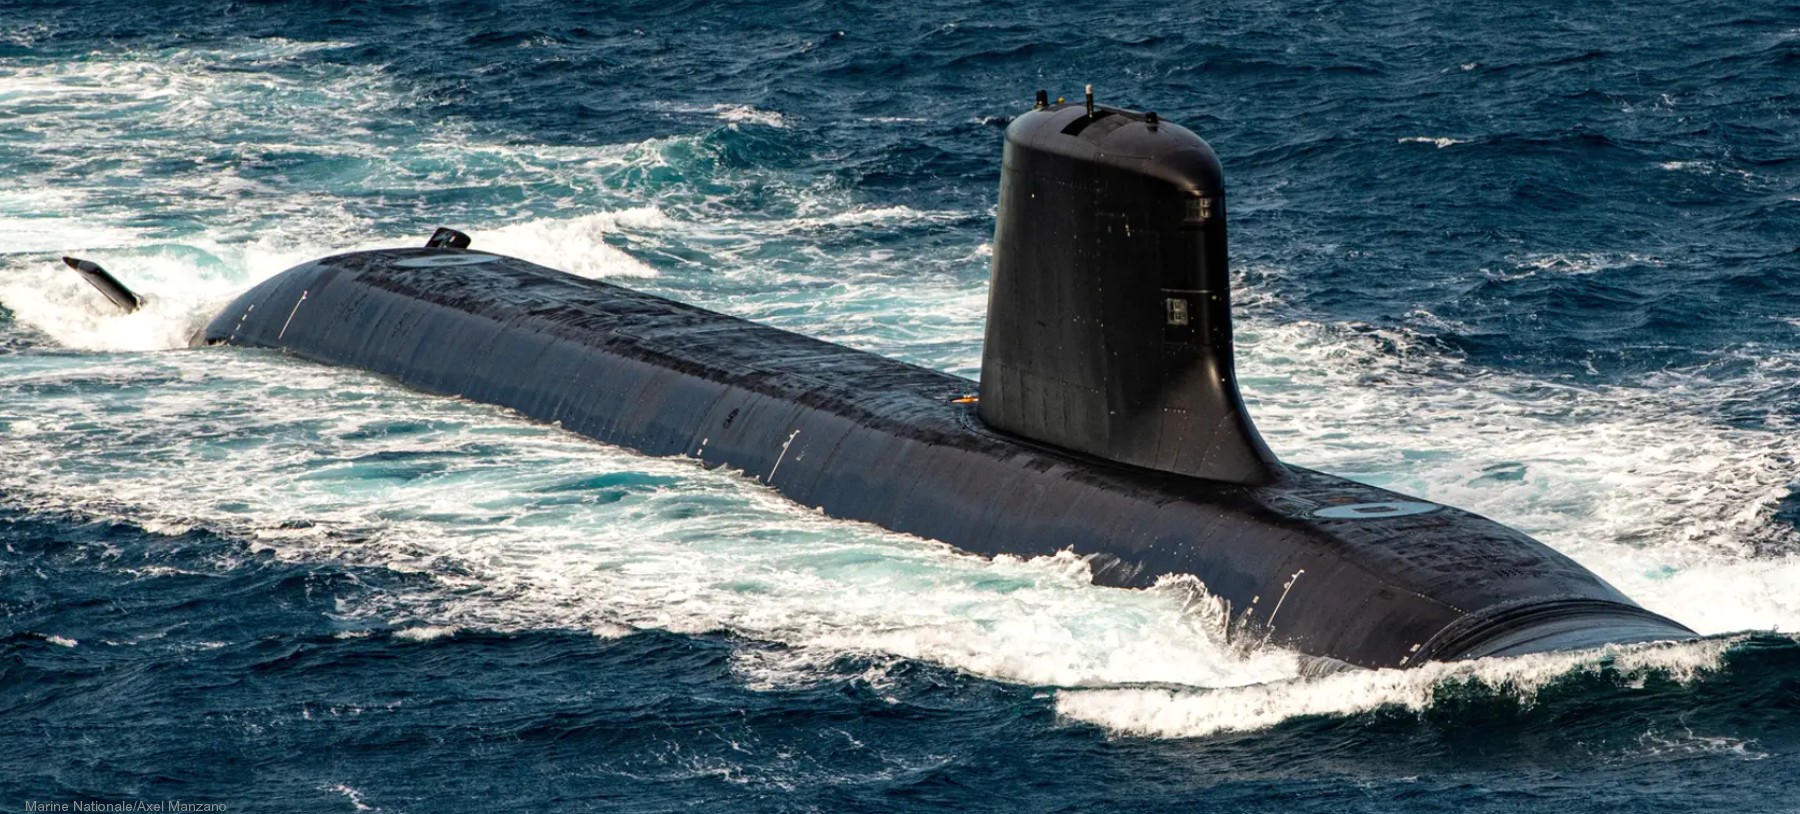 s-635 suffren barracuda class attack submarine french navy marine nationale sous-marin nucleaire d'attaque sna 14